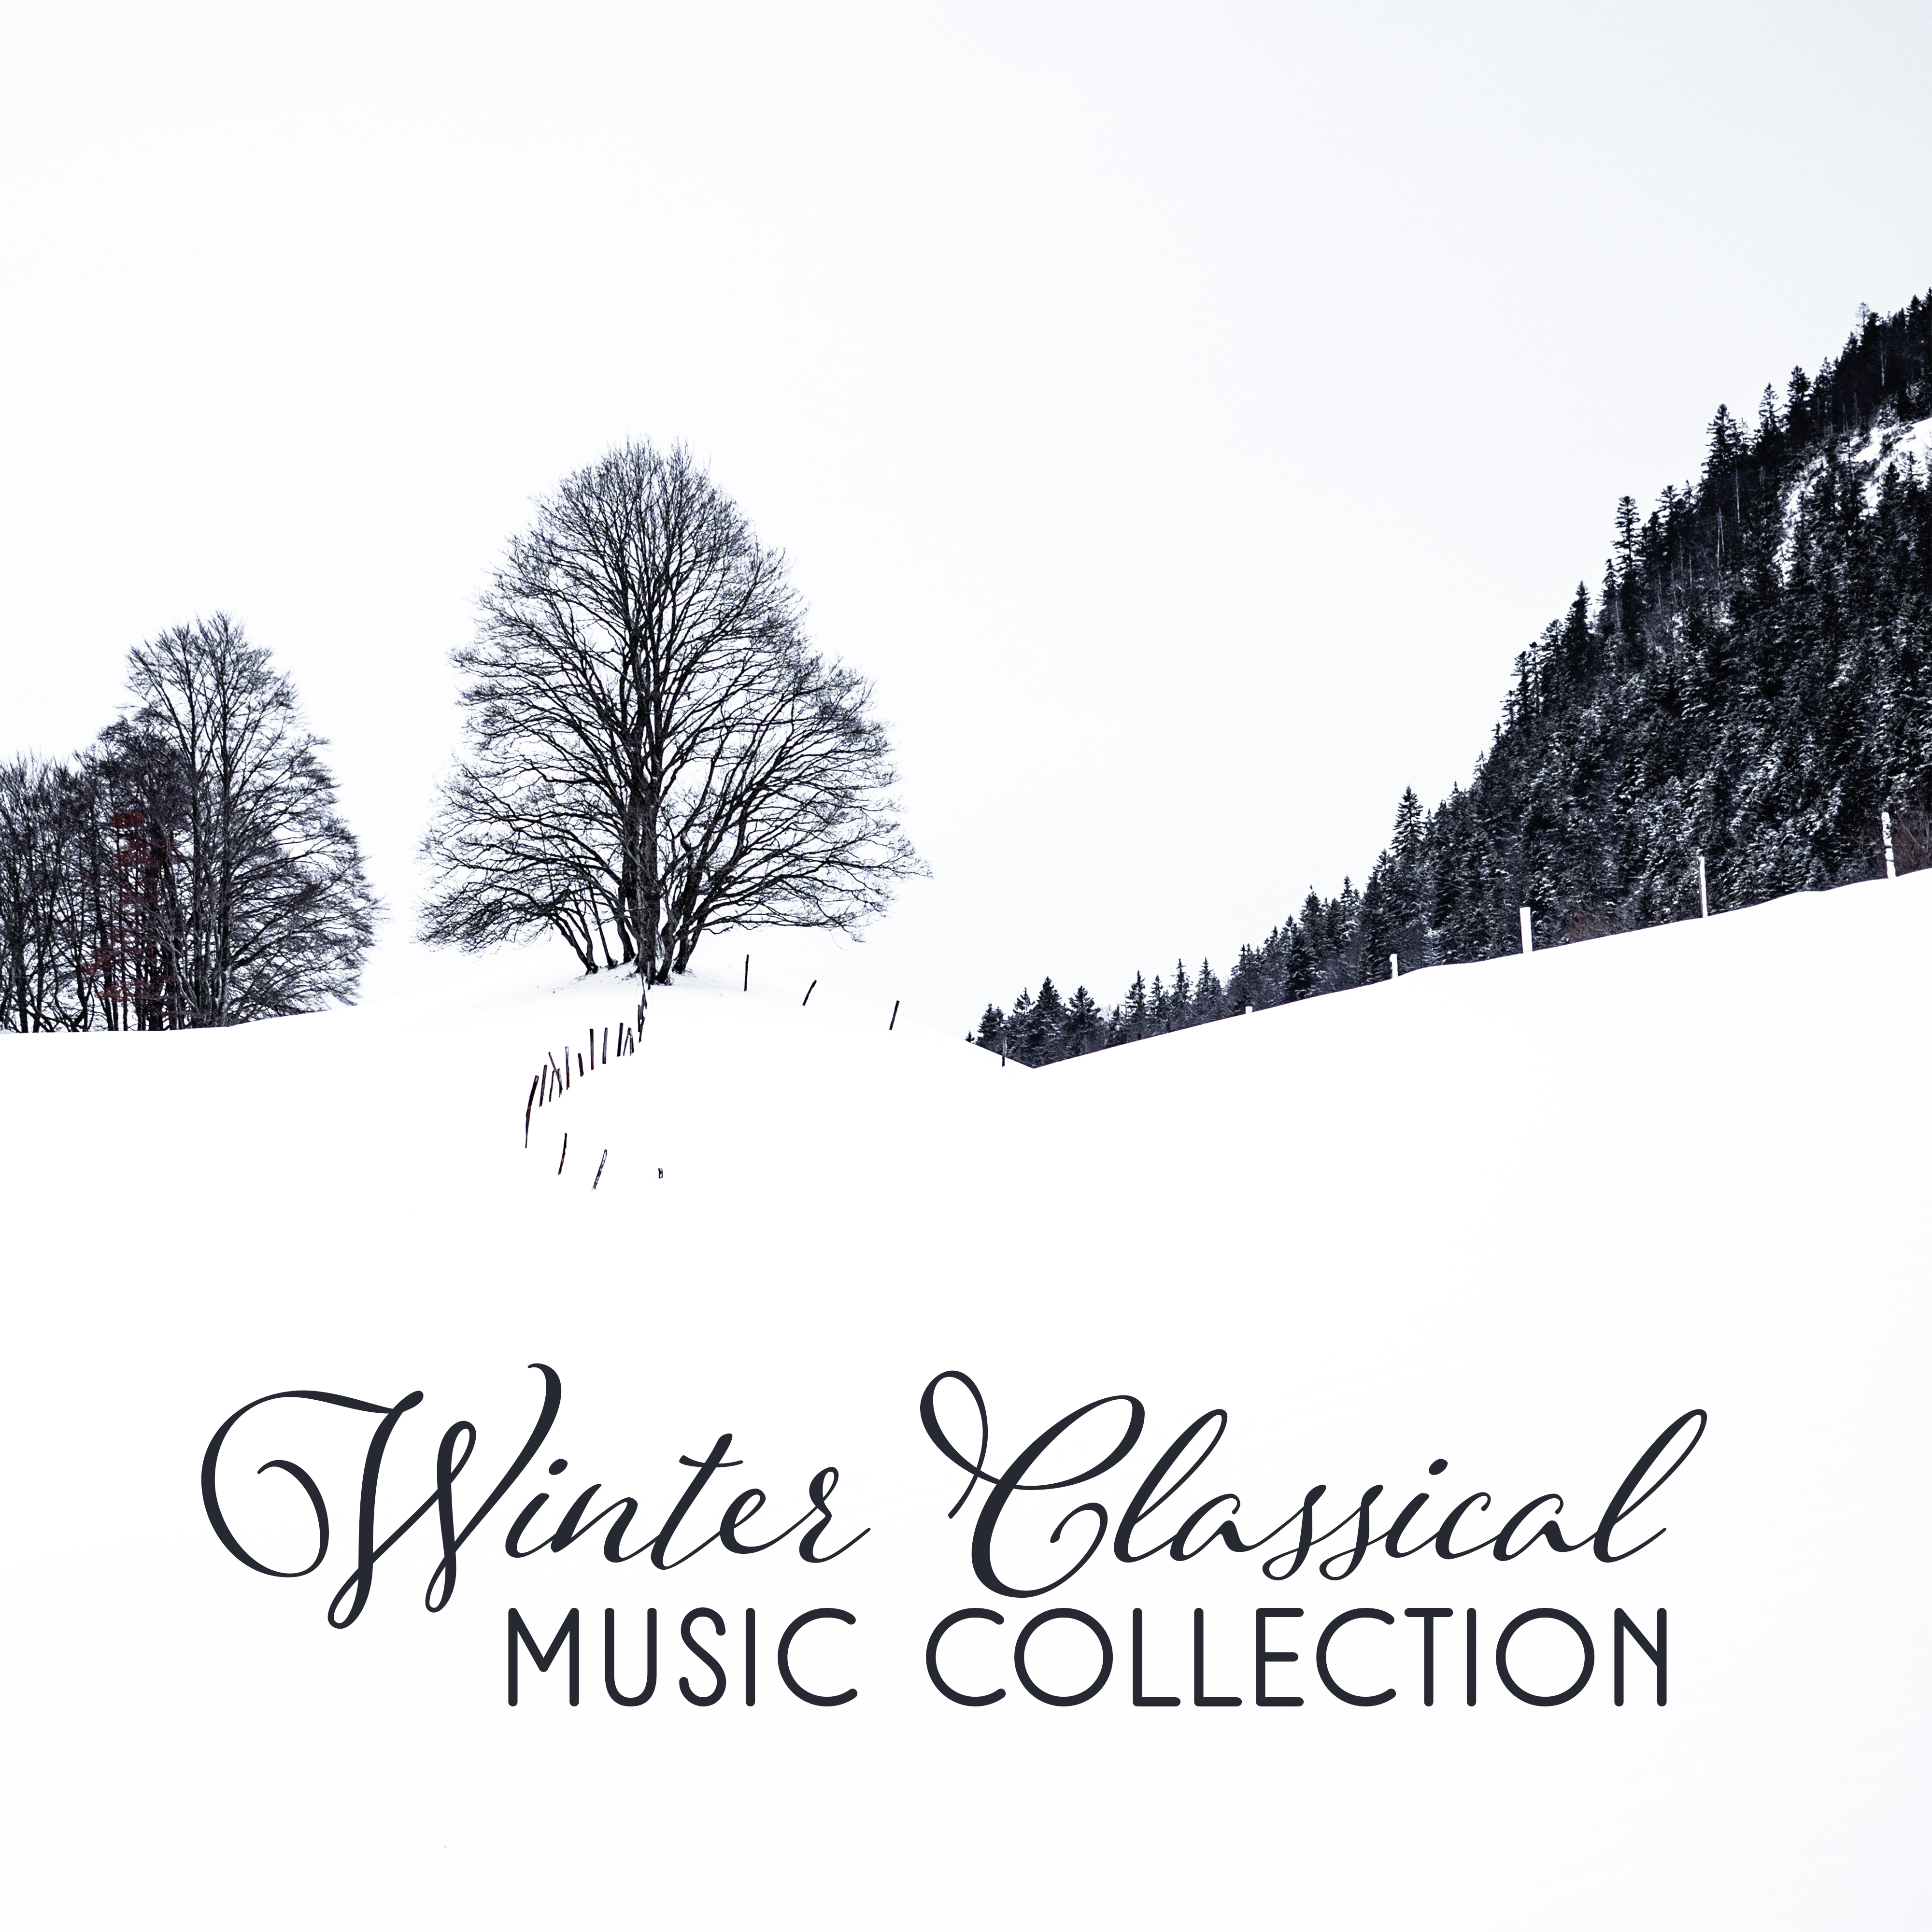 Winter Classical Music Collection